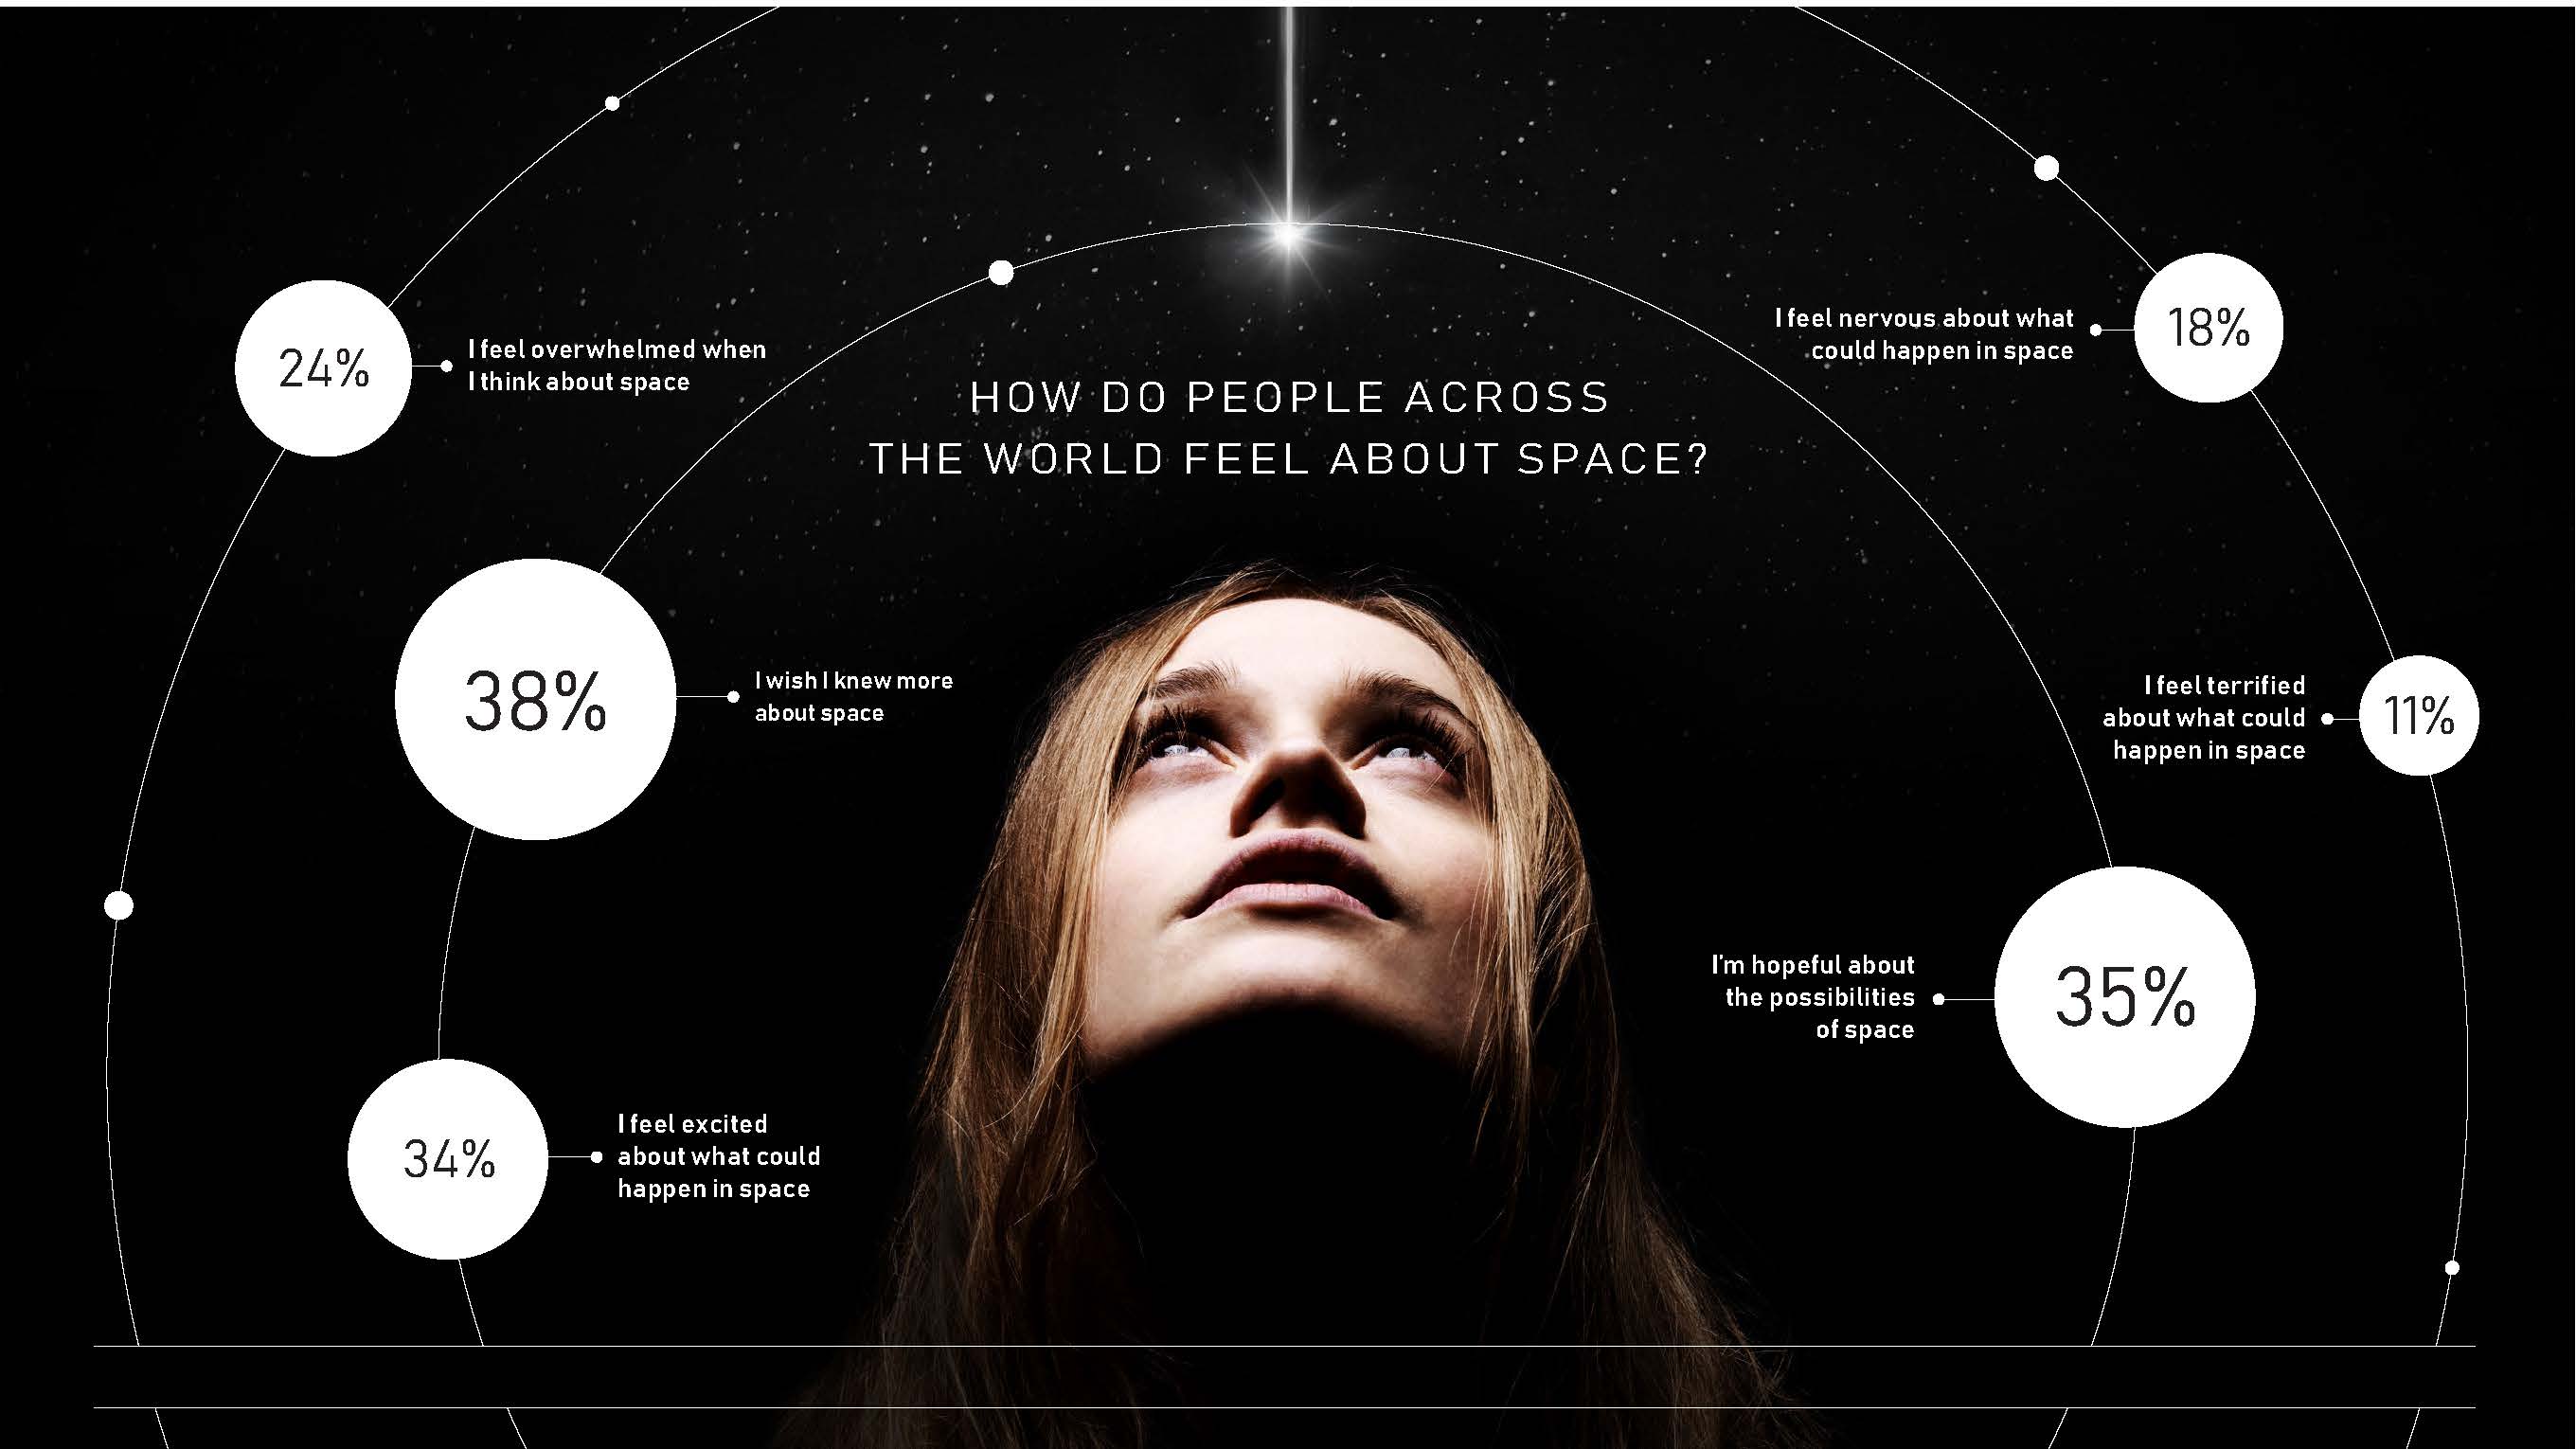 How do people across the world feel about space?